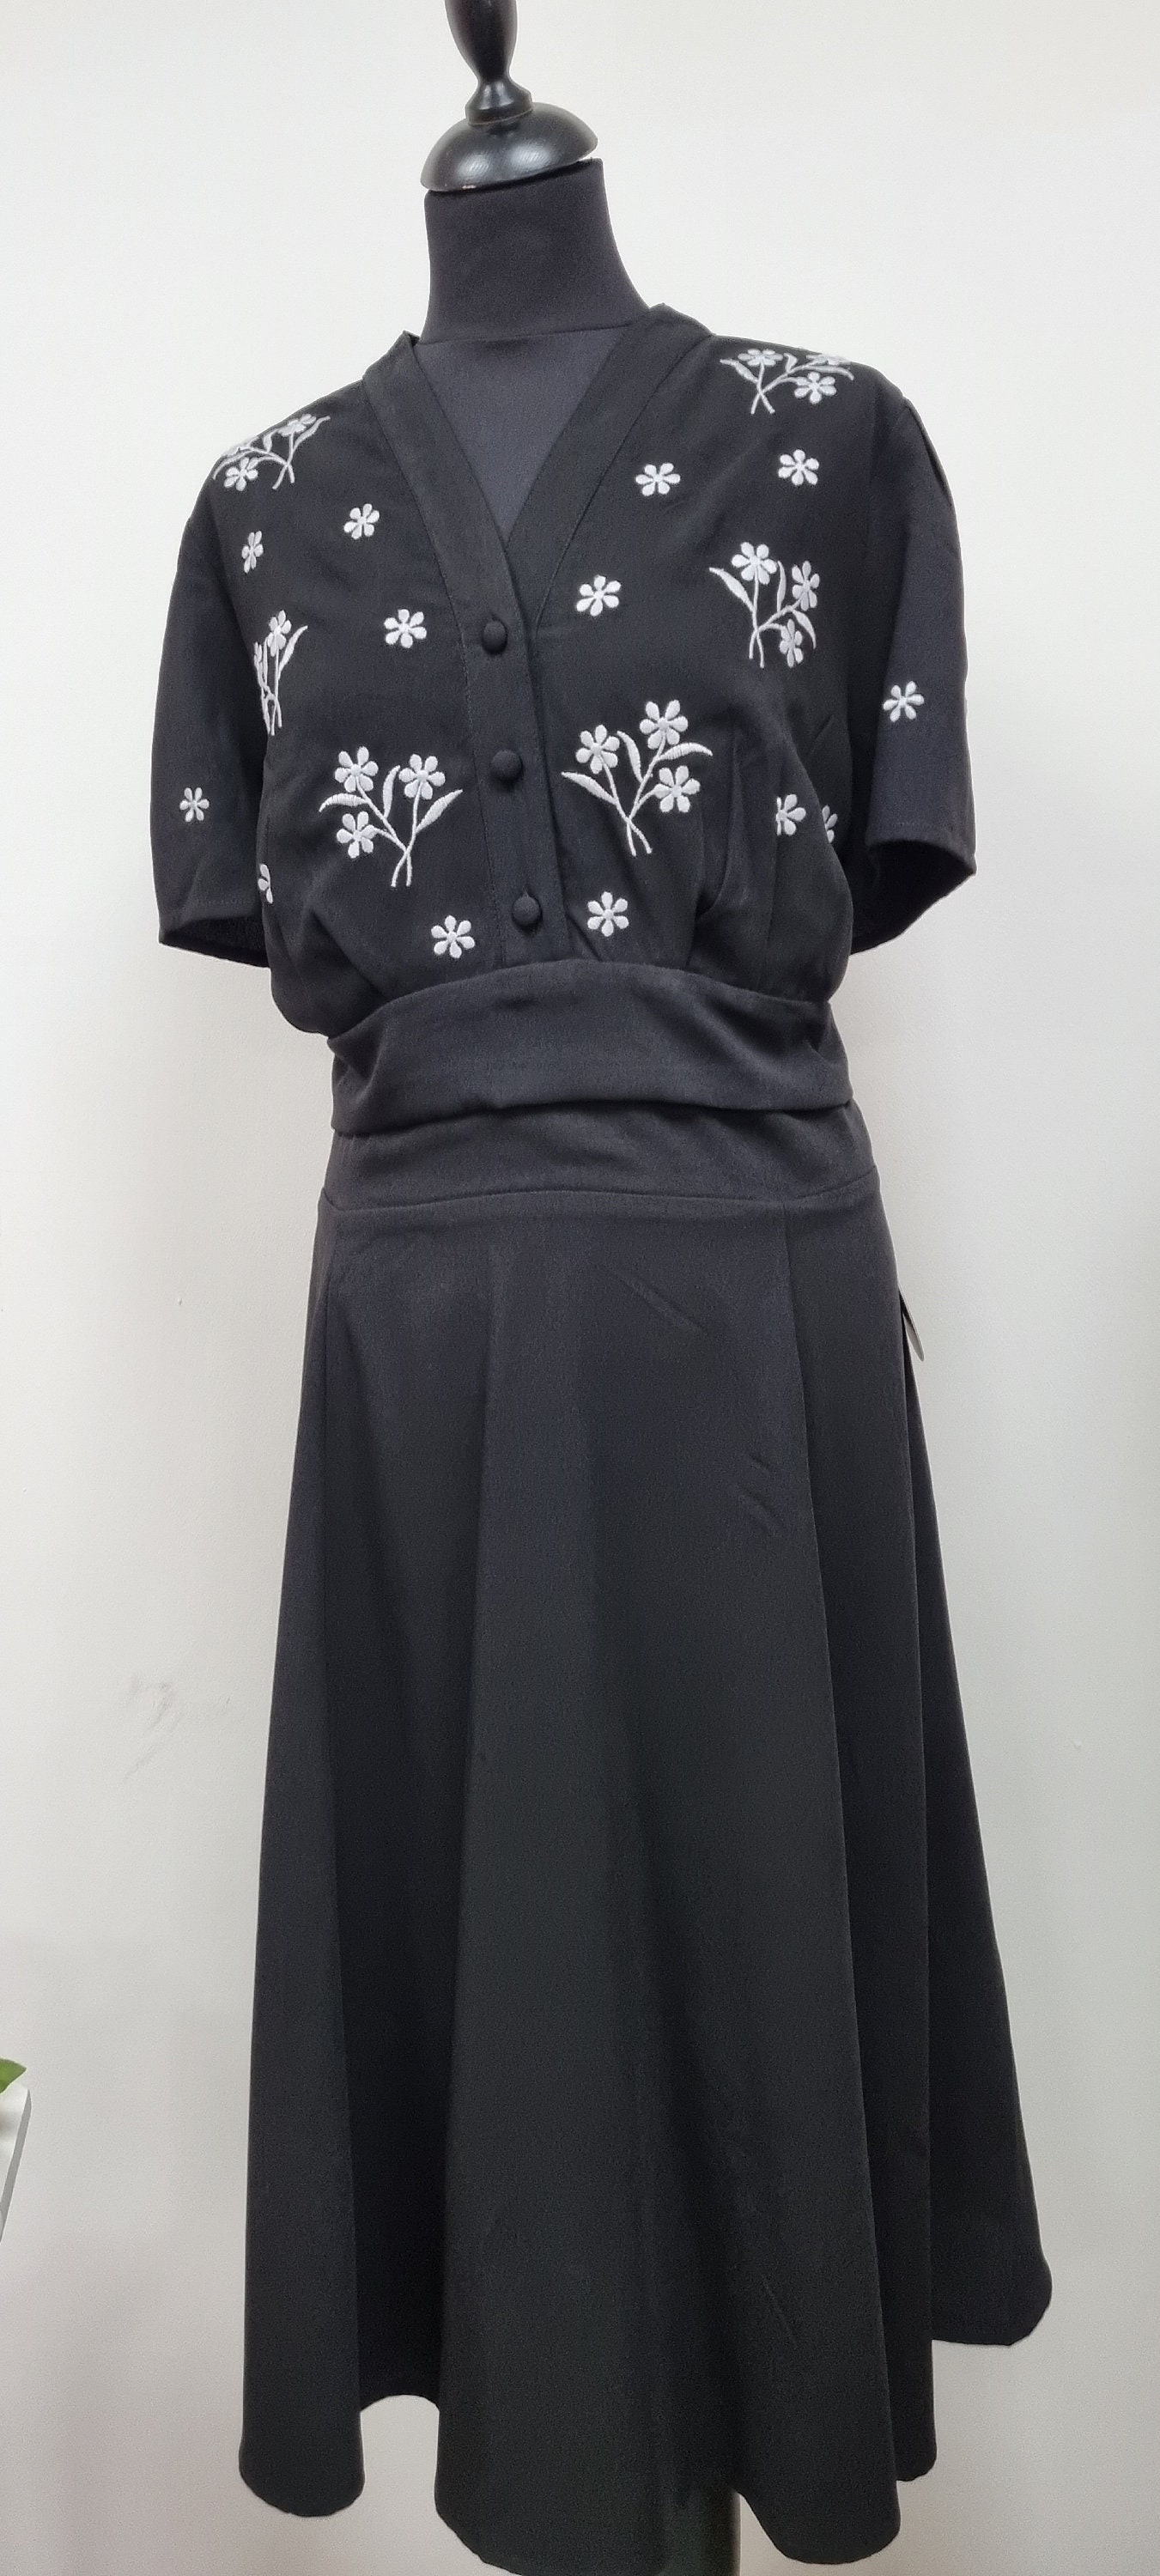 Real Vintage Search Engine 1940s Style Repro Black  White Embroidered Dress - Volup $59.12 AT vintagedancer.com